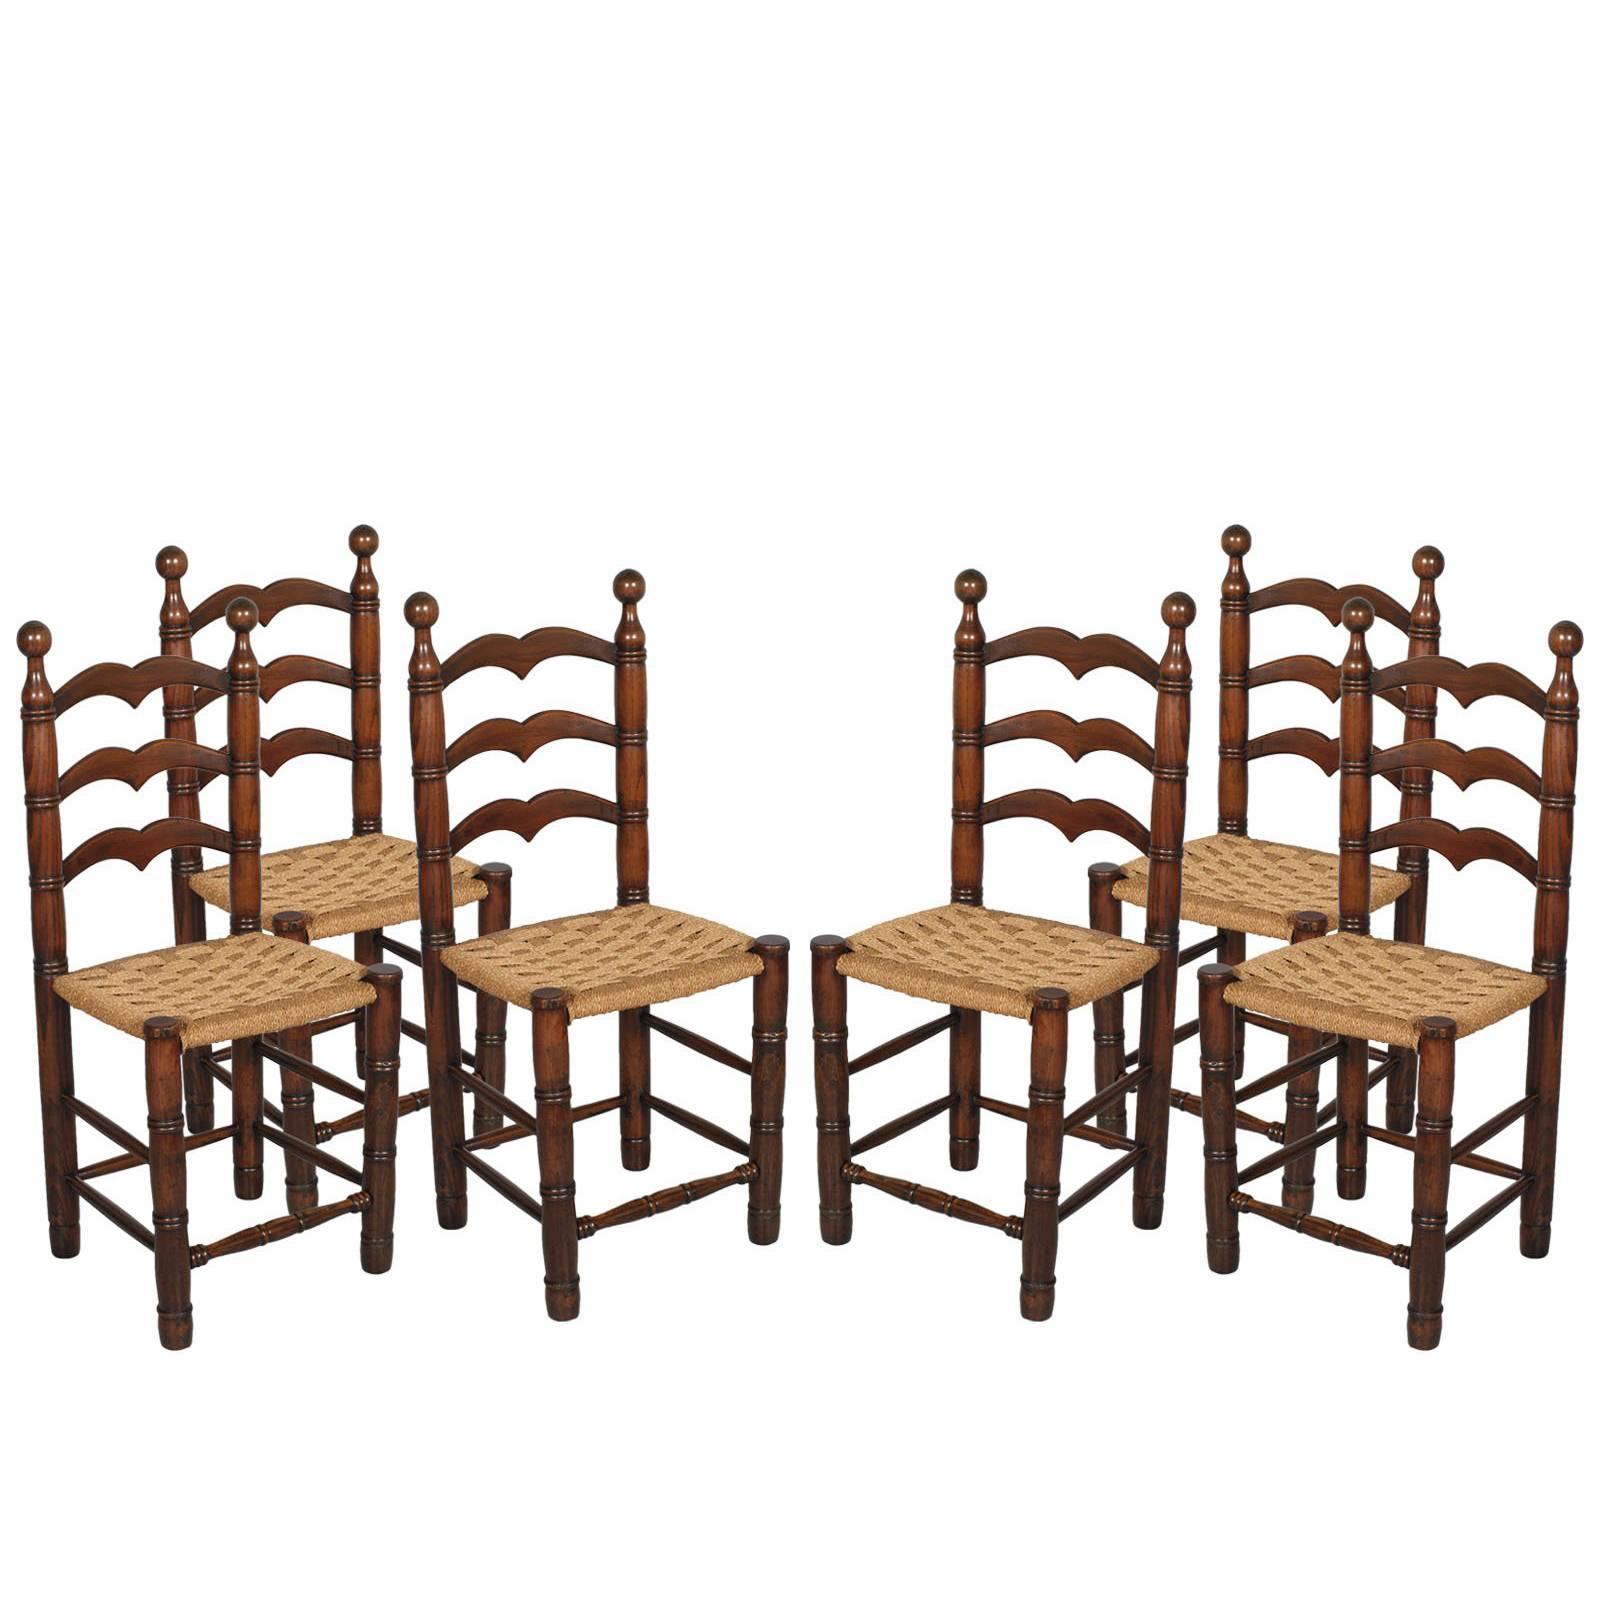 Italy Calligaris Renaissance "Pisane" Chairs, Solid Turned Oak with Straw Seat